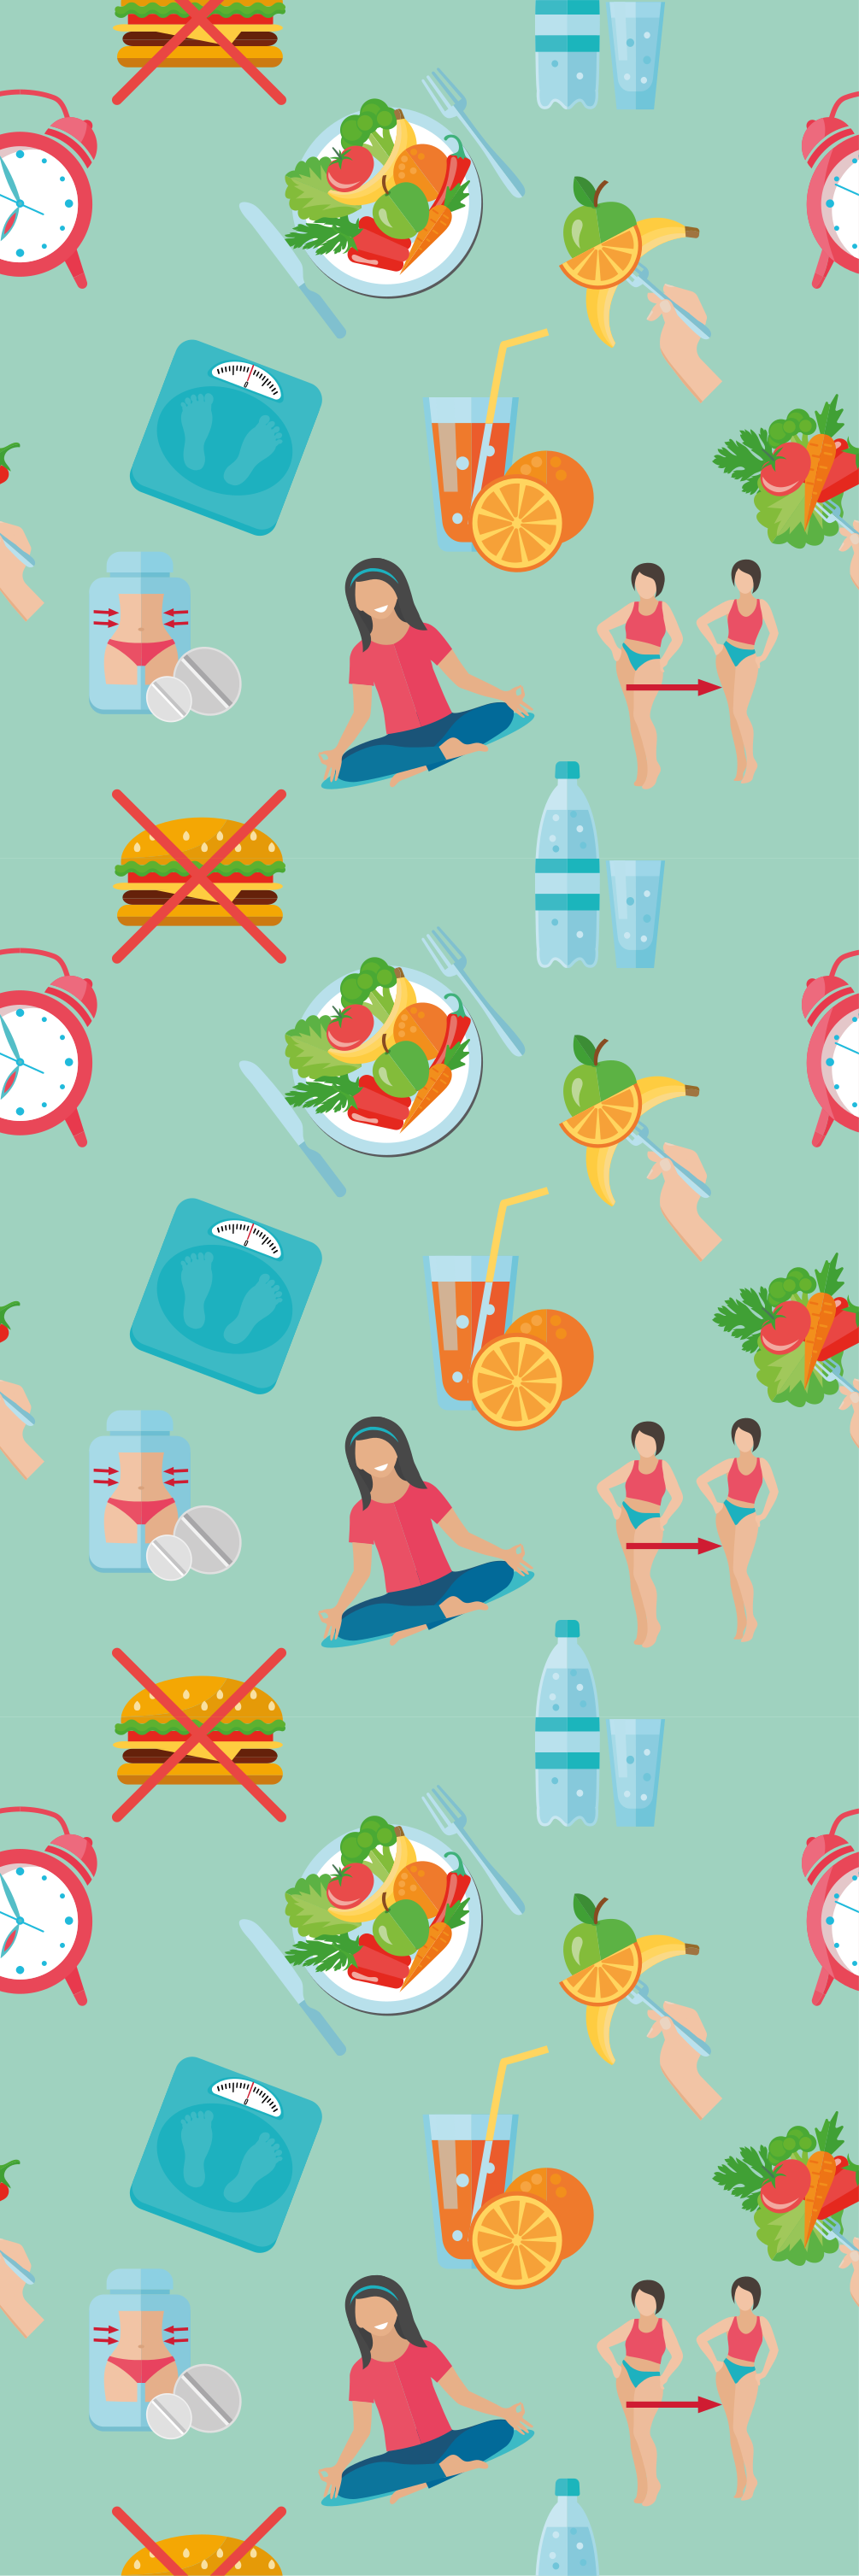 Weight loss healthy diet plan flat icons set wallpaper